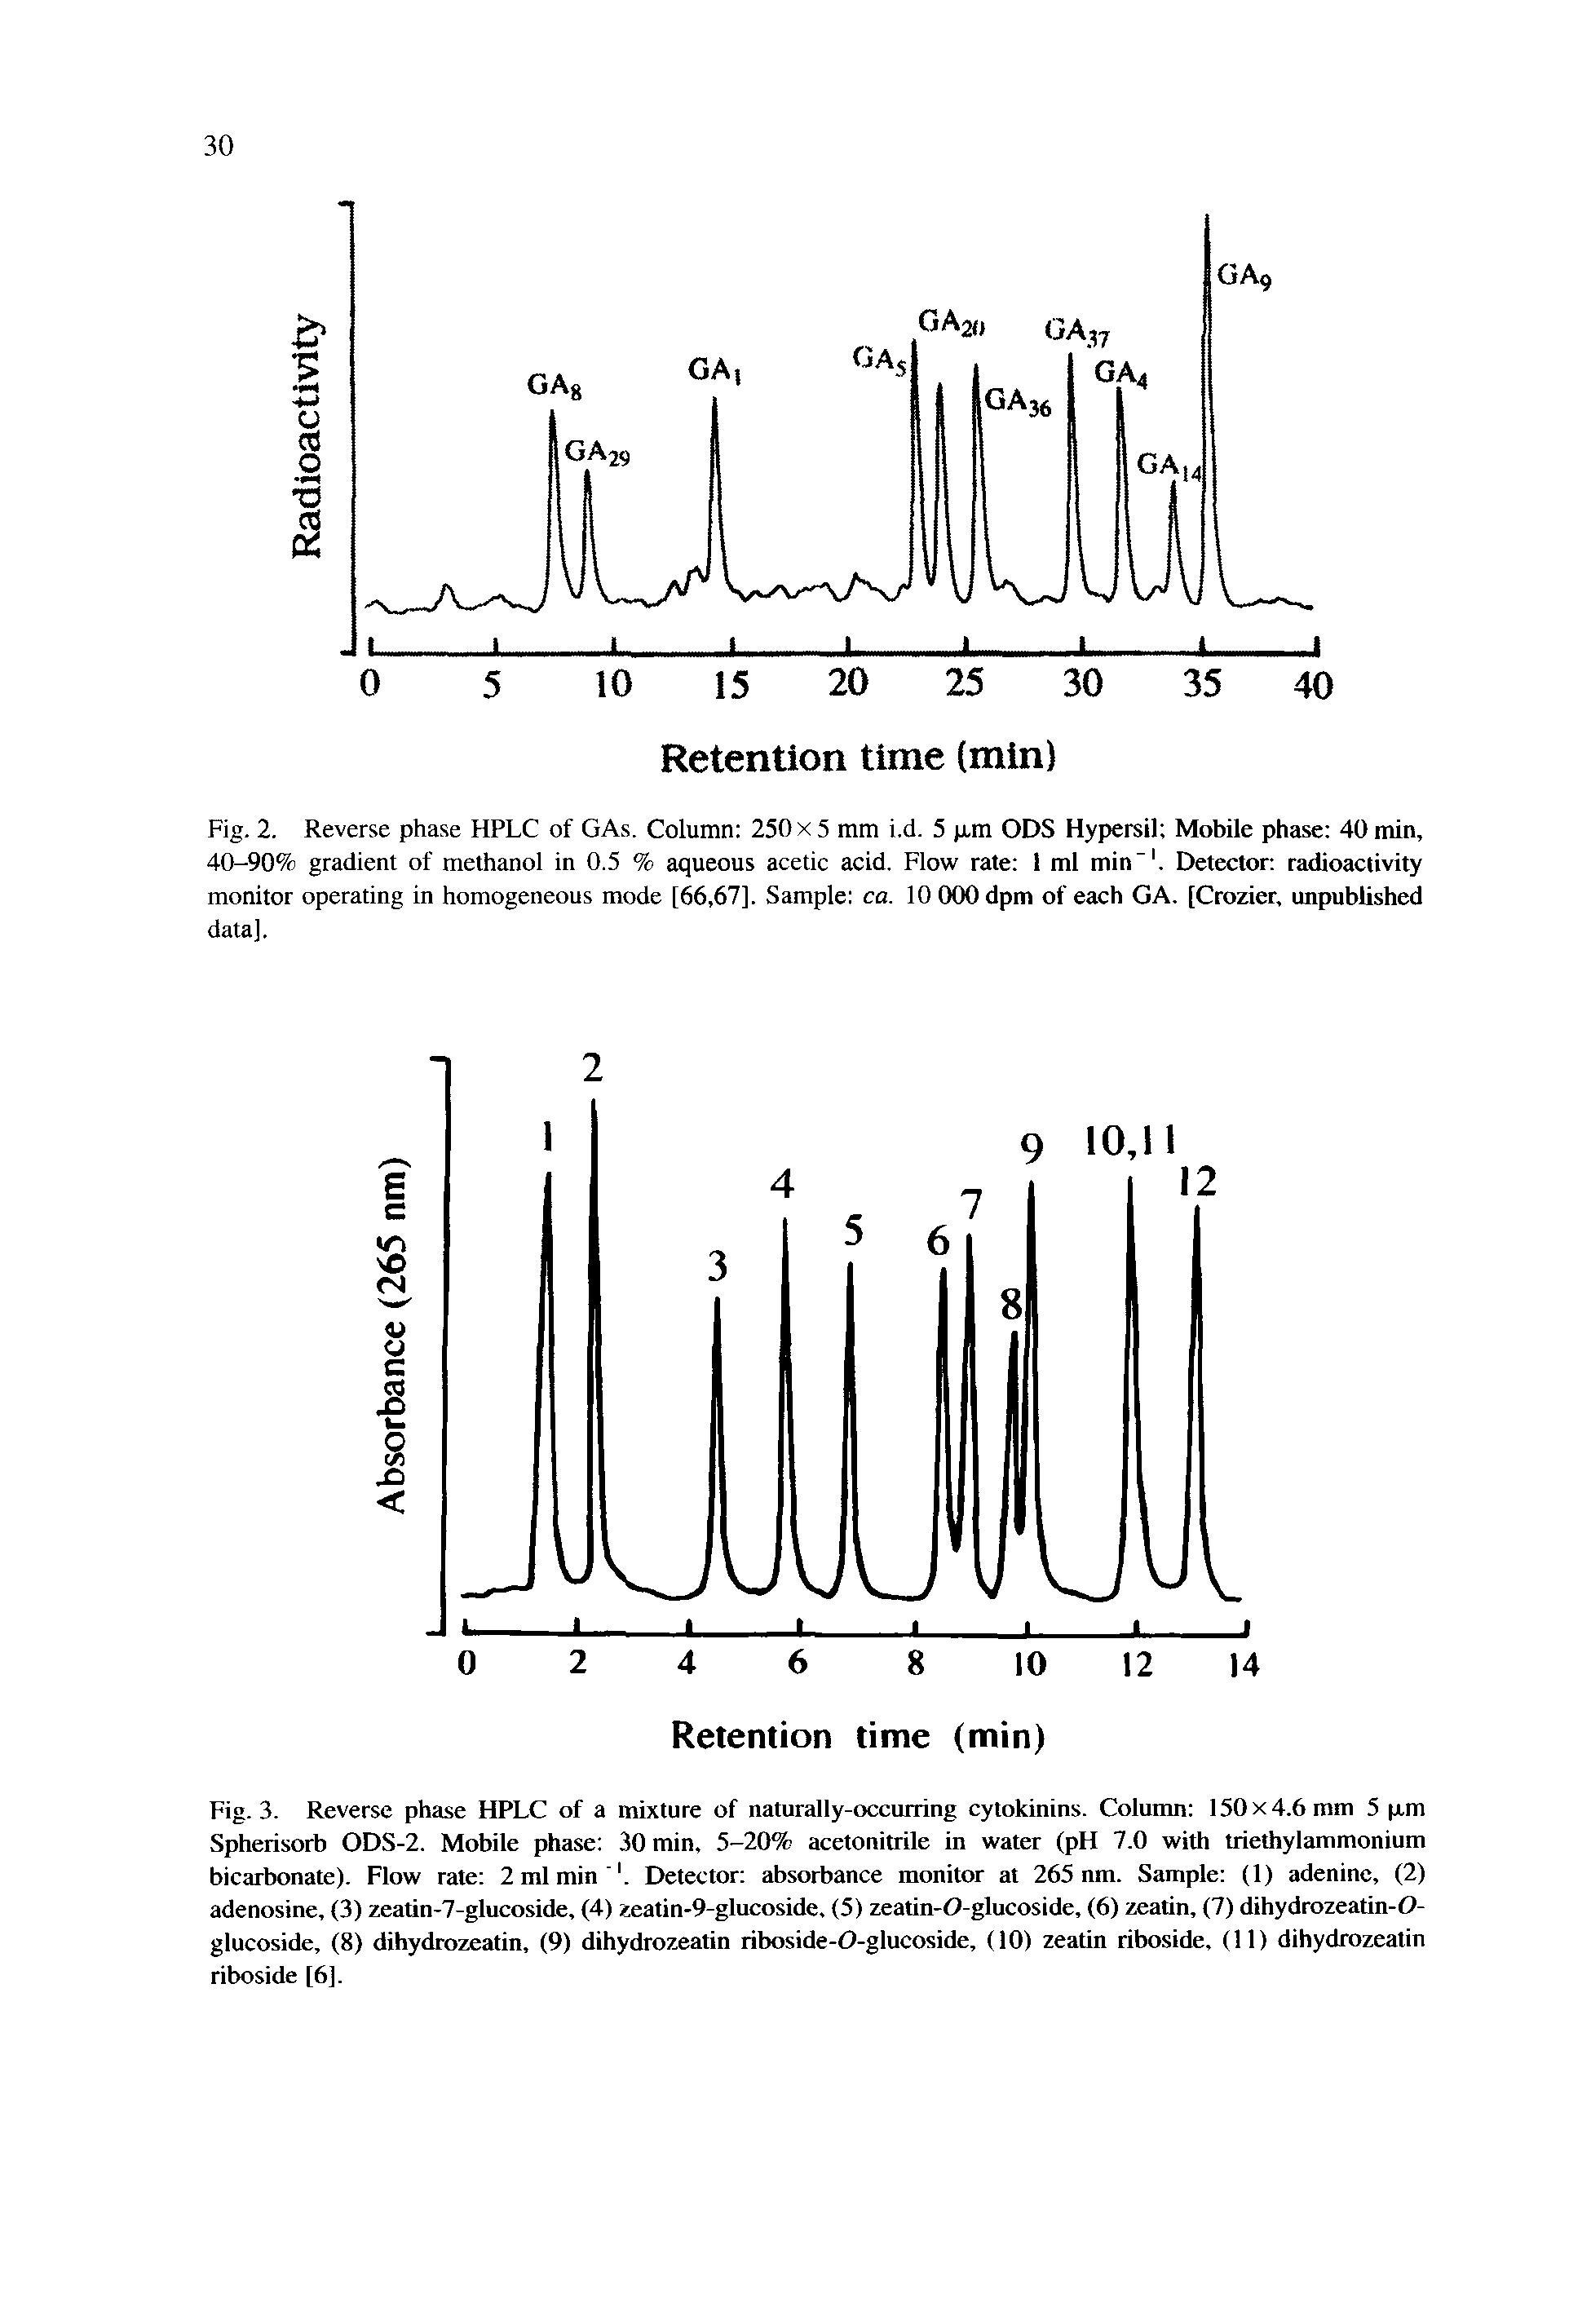 Fig. 2. Reverse phase HPLC of GAs. Column 250 x 5 mm i.d. 5 p,m ODS Hypersil Mobile phase 40 min, 40-90% gradient of methanol in 0.5 % aqueous acetic acid. Flow rate 1 ml min". Detector radioactivity monitor operating in homogeneous mode [66,67]. Sample ca. lOOOOdpm of each GA. [Crozier, unpublished data].